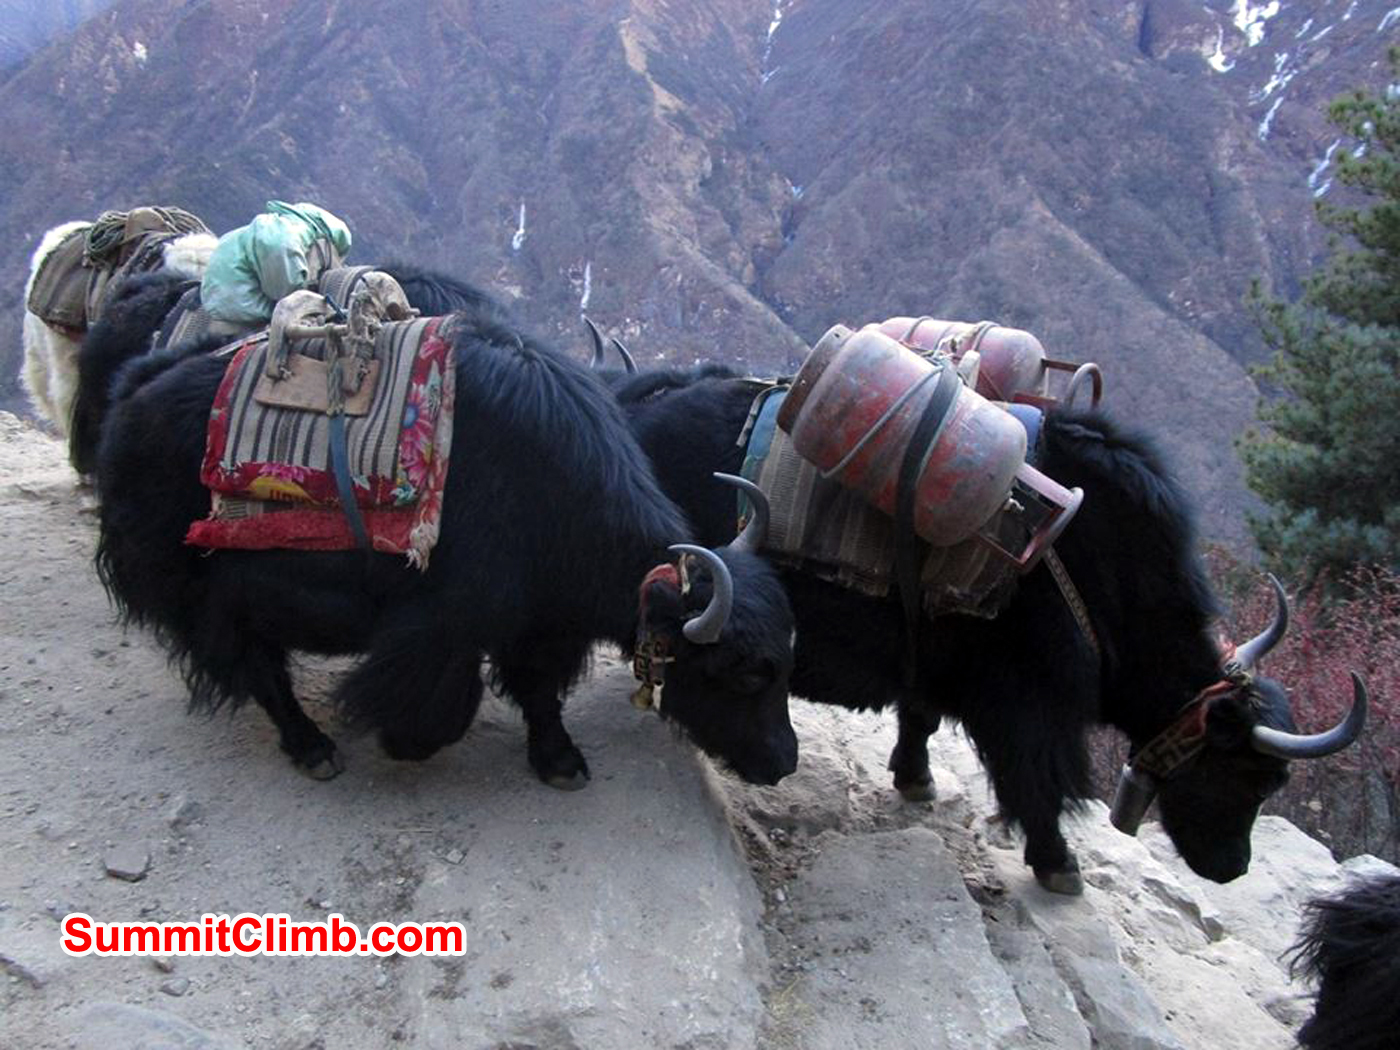 Yaks are use for carrying loads in khumbu valley. Photo Meryl Lipman